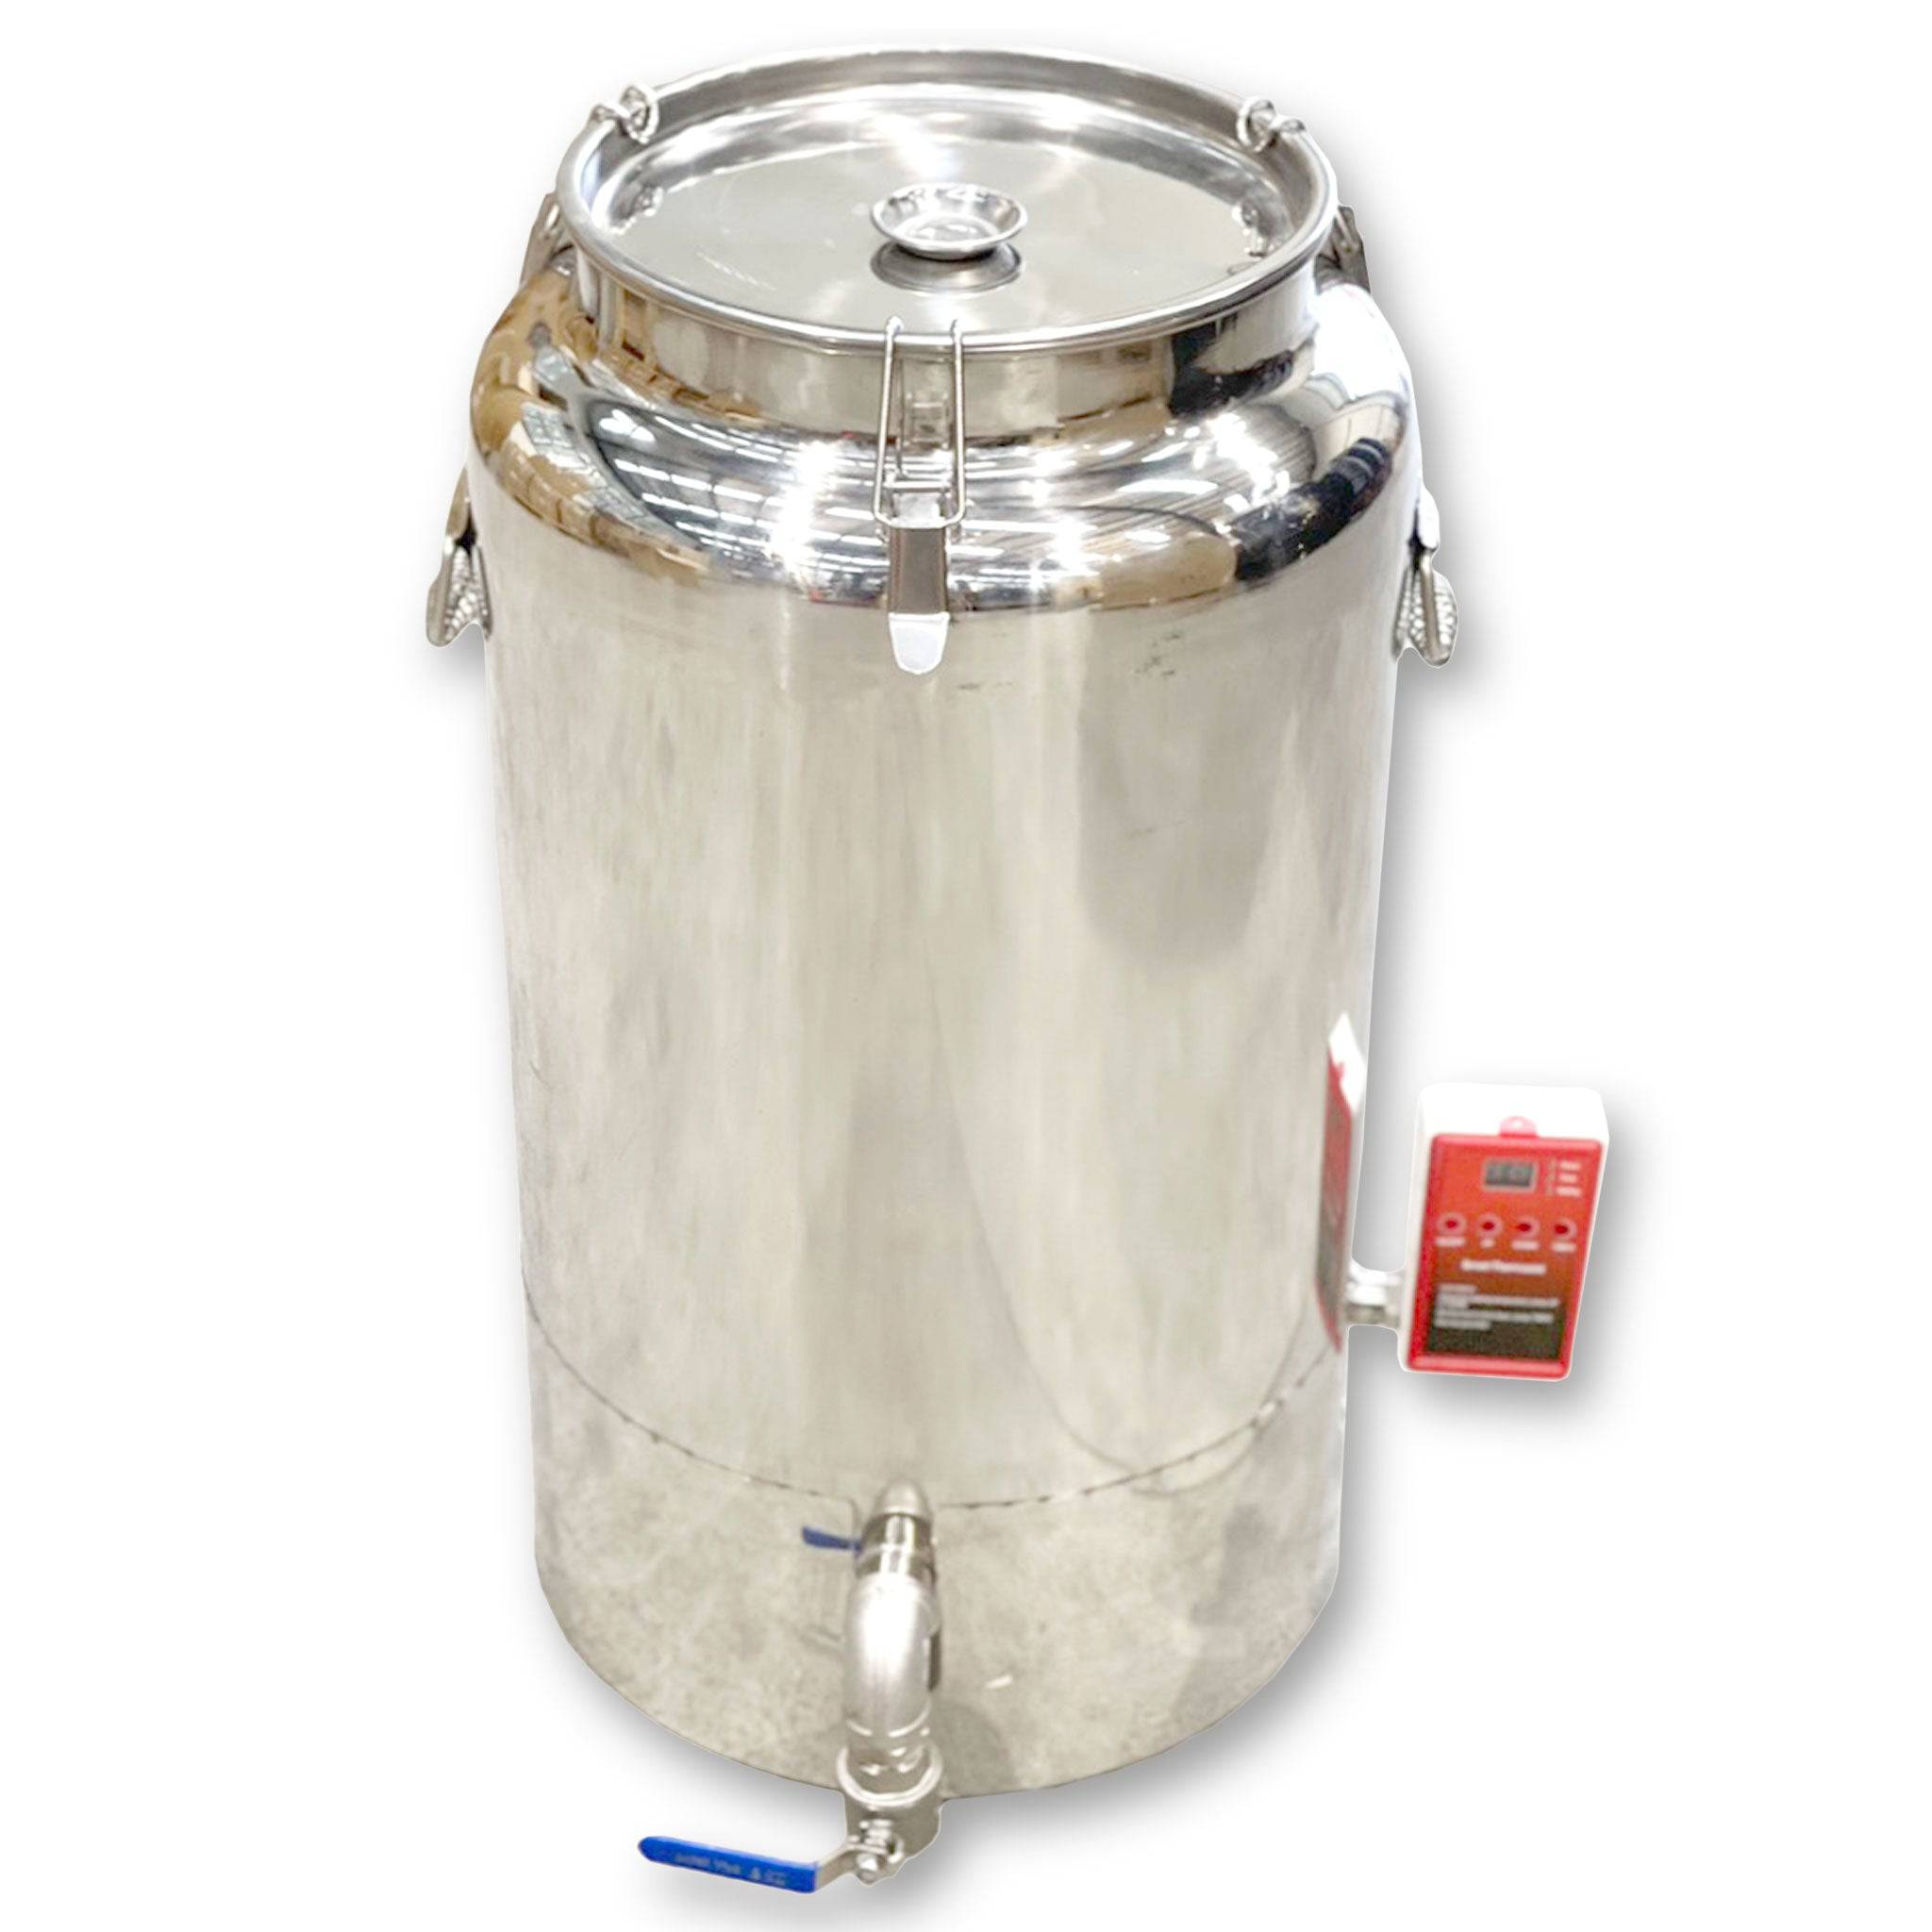 Honey Tank with heater - Stainless Steel - 80L - Processing collection by Buzzbee Beekeeping Supplies